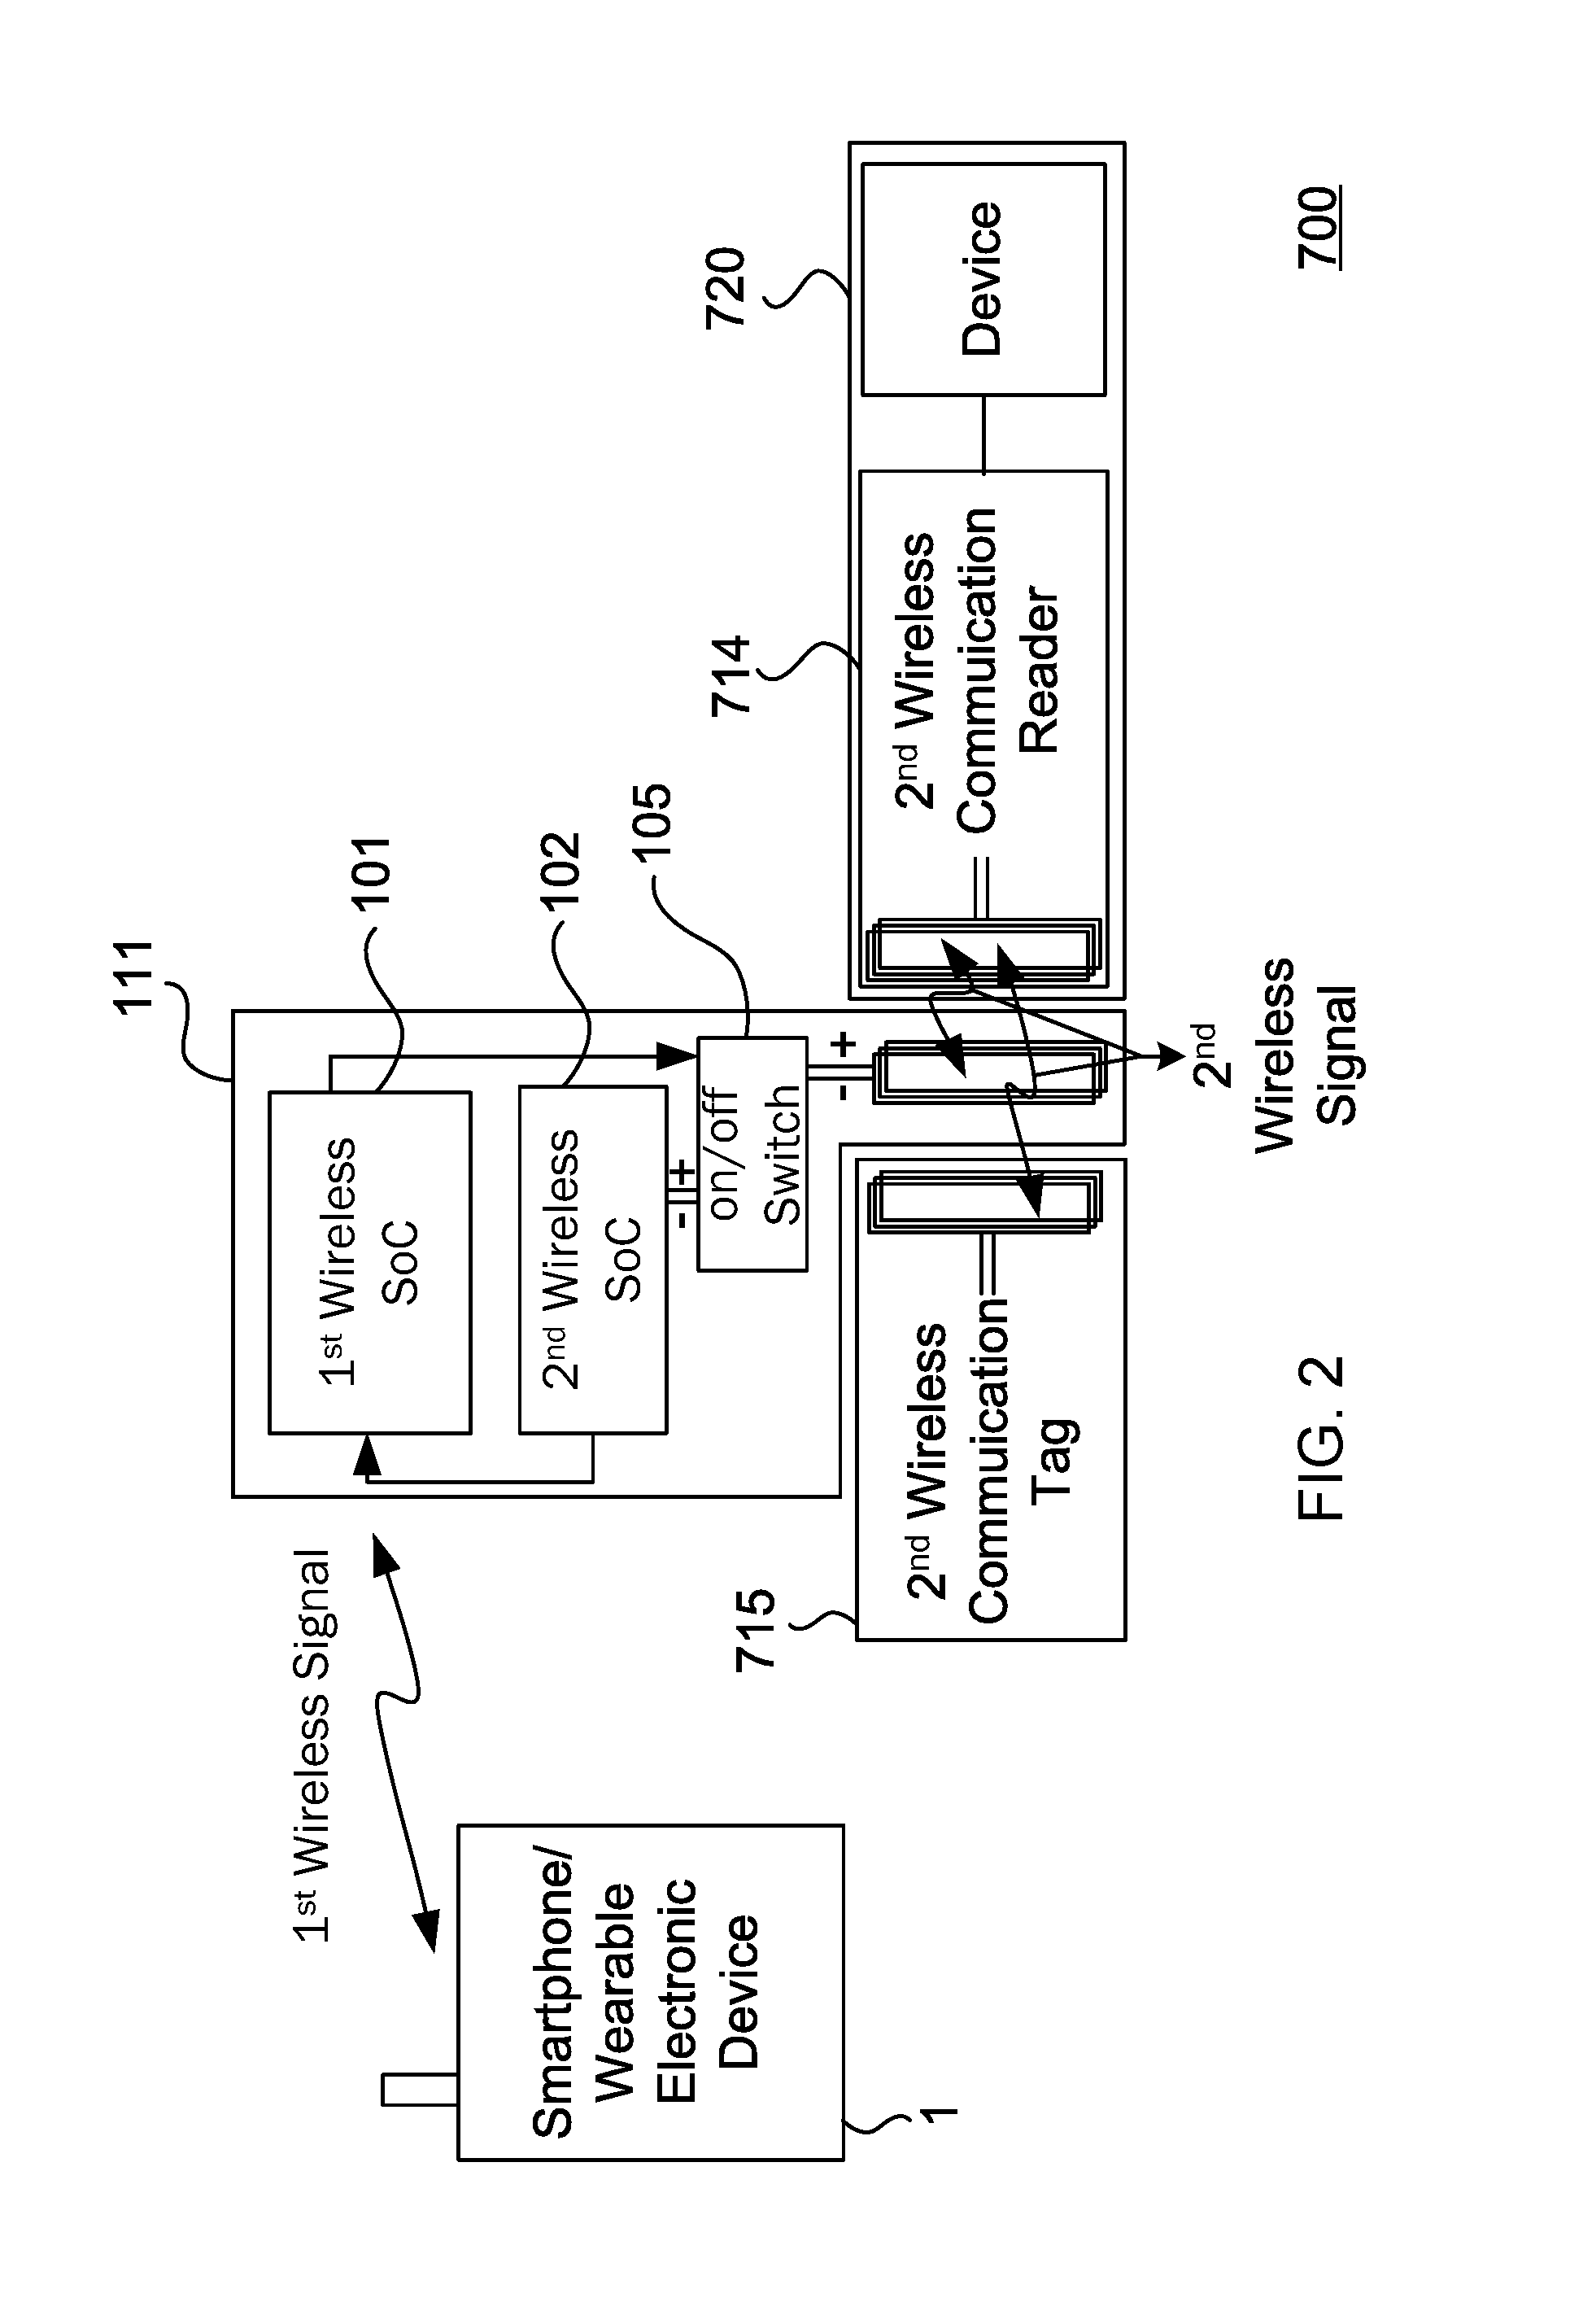 Cross-platform automated perimeter access control system and method adopting selective adapter